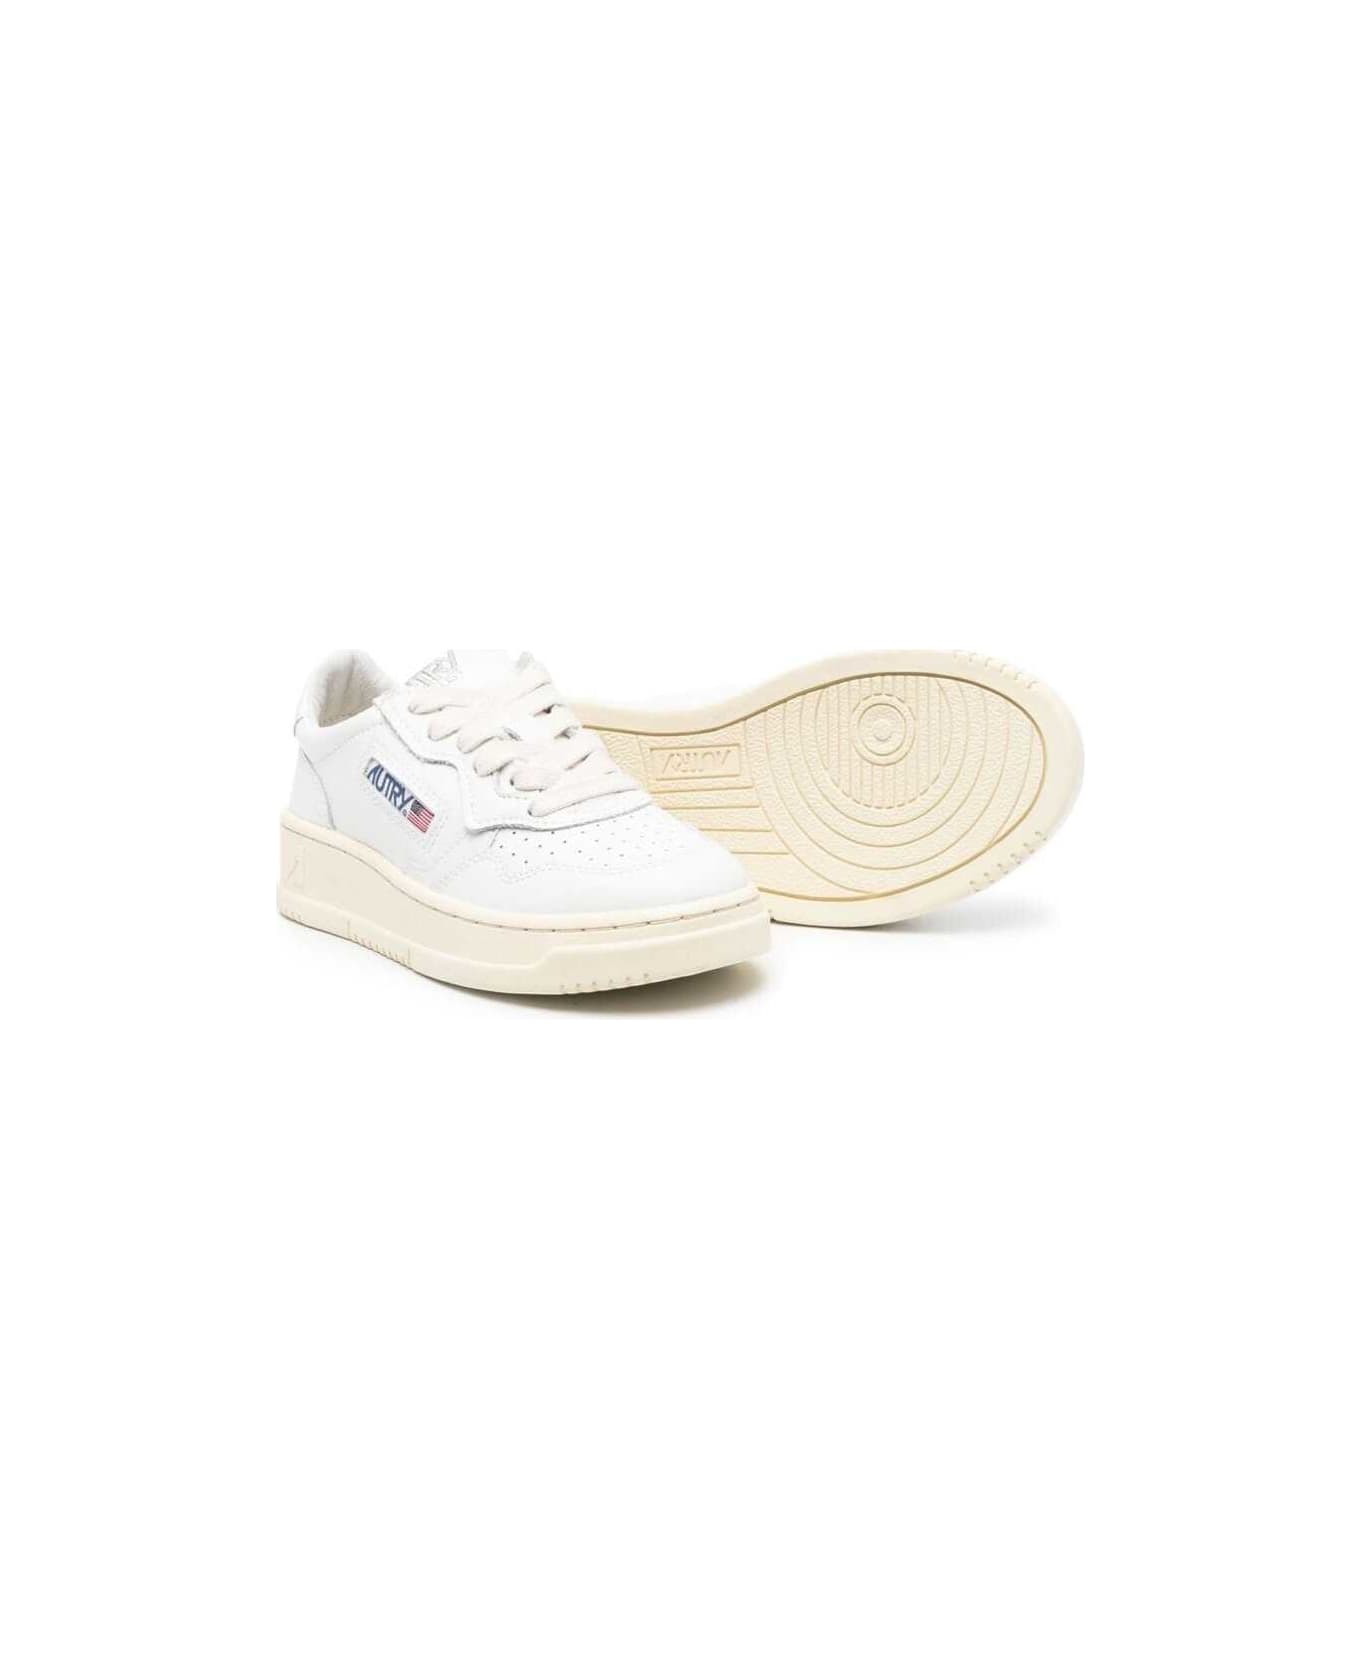 Autry White 'medalist' Low Top Sneakers In Cow Leather Boy - Wht/wht シューズ